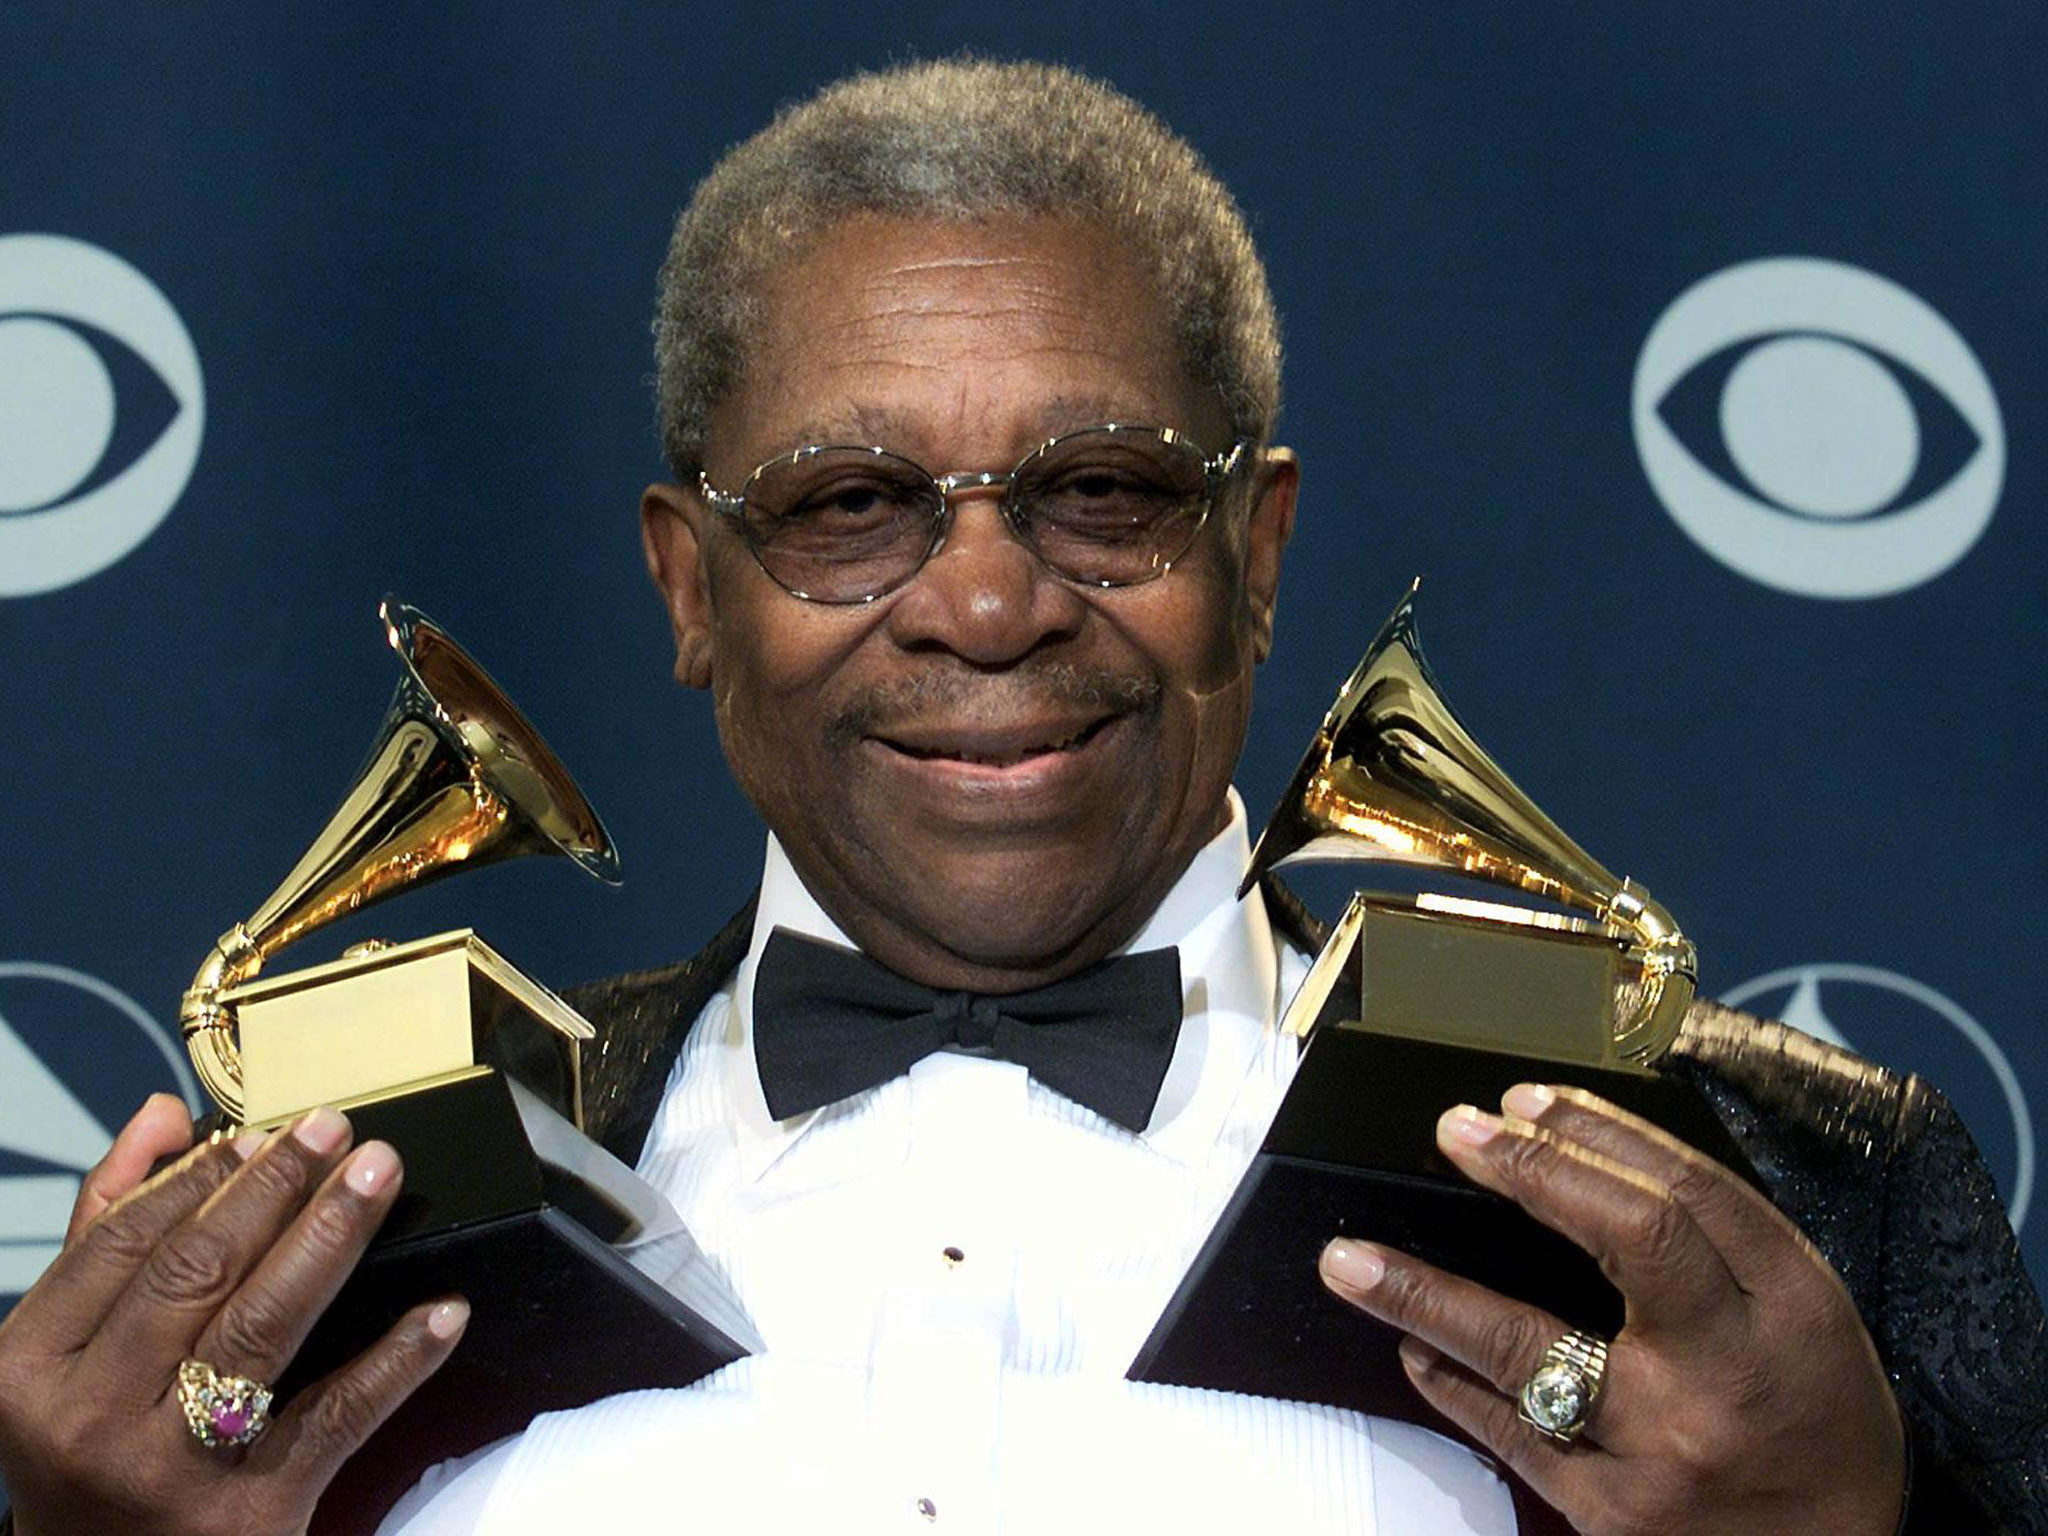 2048x1536 BB King: Eight facts about the late blues guitar legend | The Independent